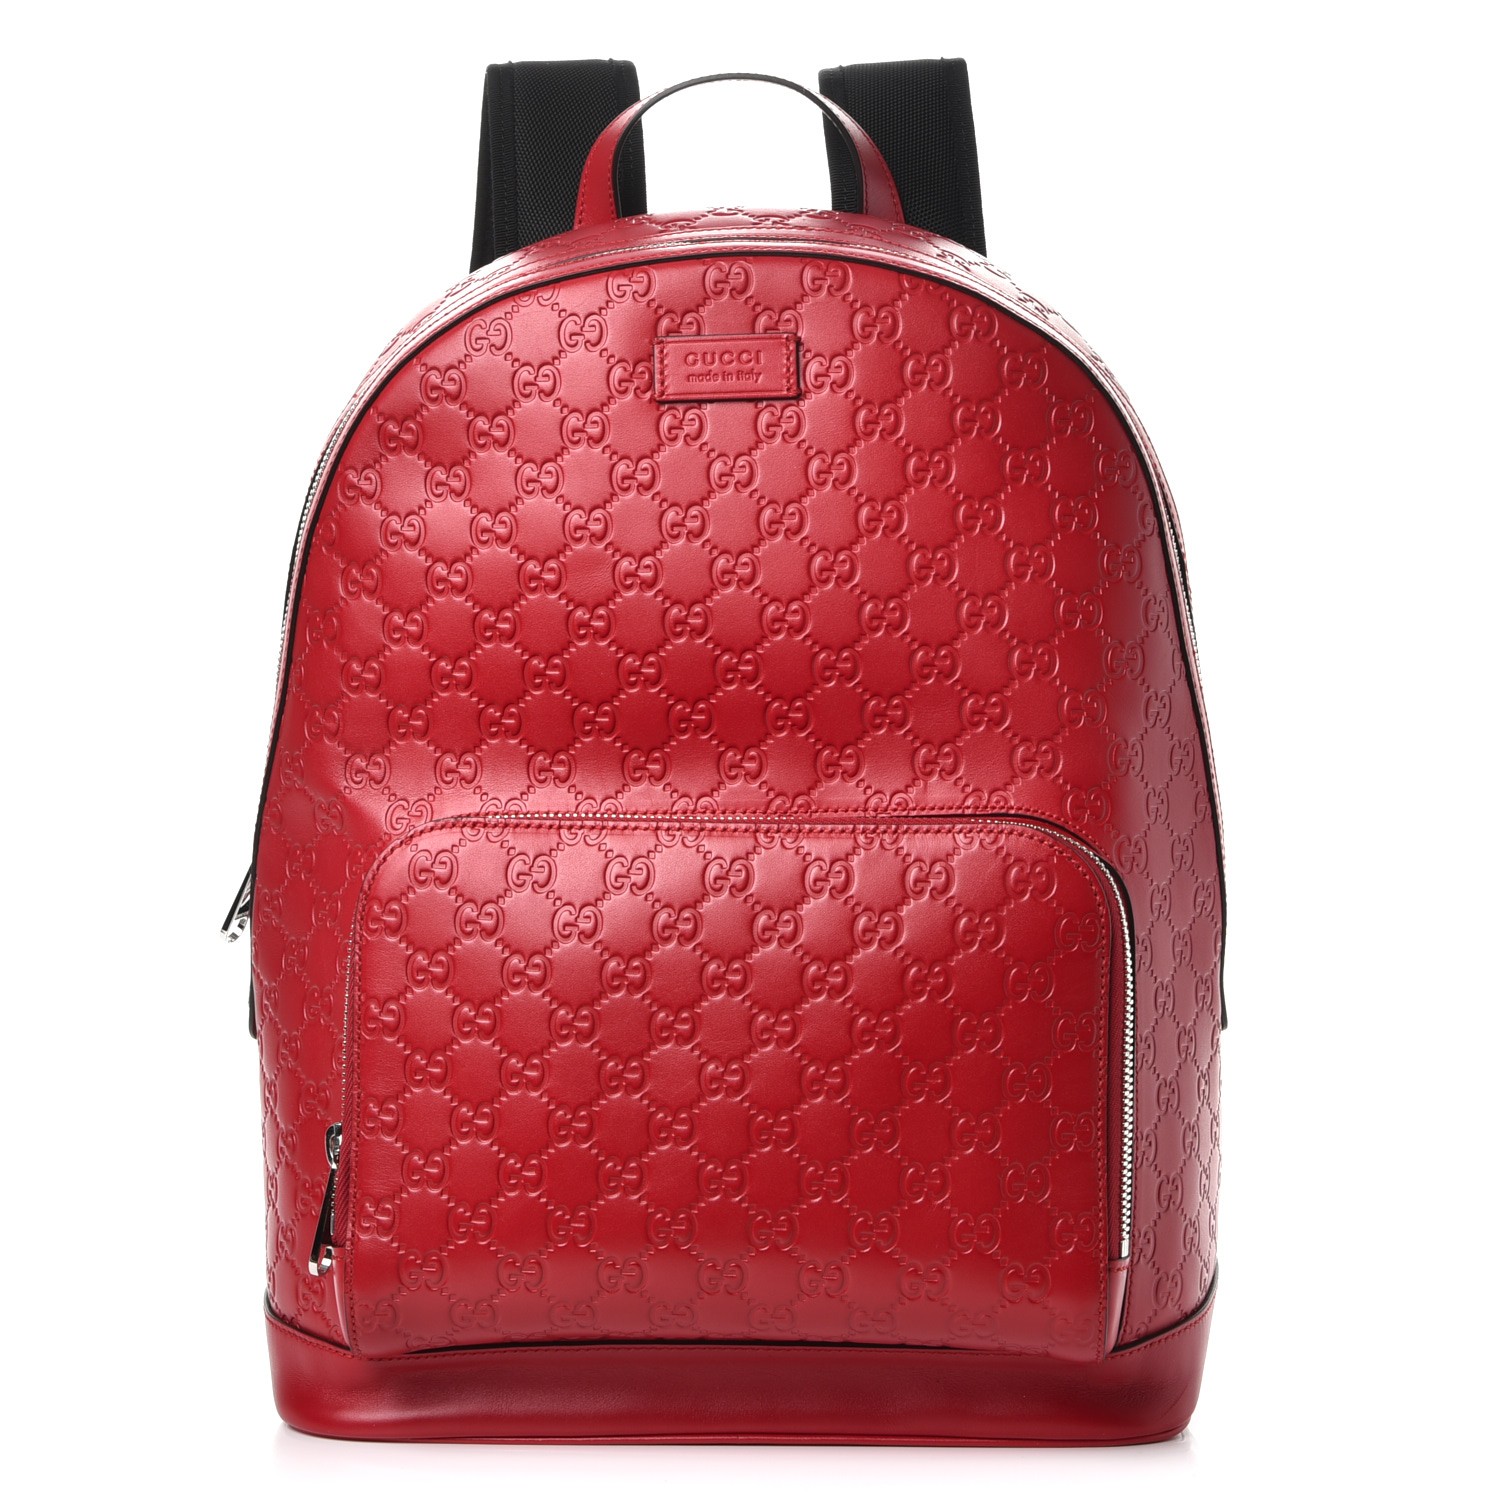 GUCCI Guccissima Signature Backpack Hibiscus Red 235734